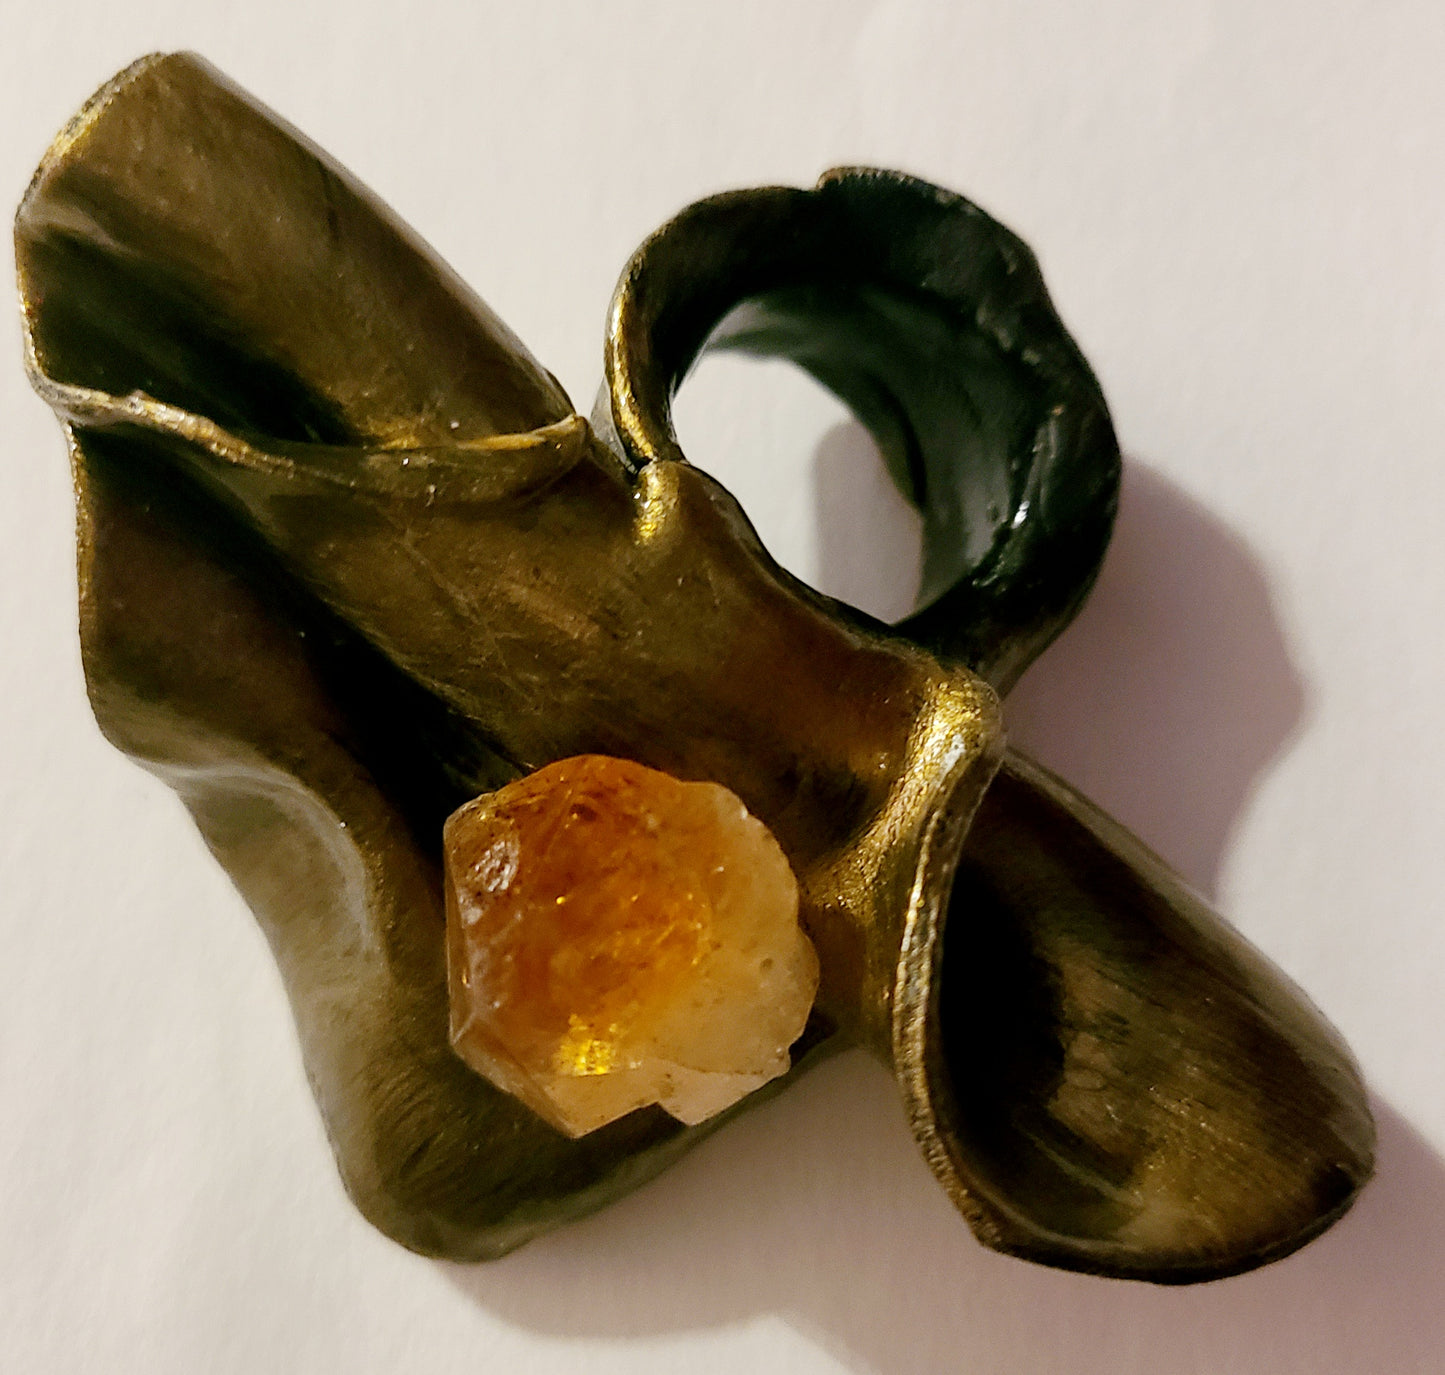 Rough Citrine Crystal In Sensuous Sculpted Bronze Statement Ring Size 8-9, Artisan Gemstone Cocktail Ring, Showstopper Jewelry Porn